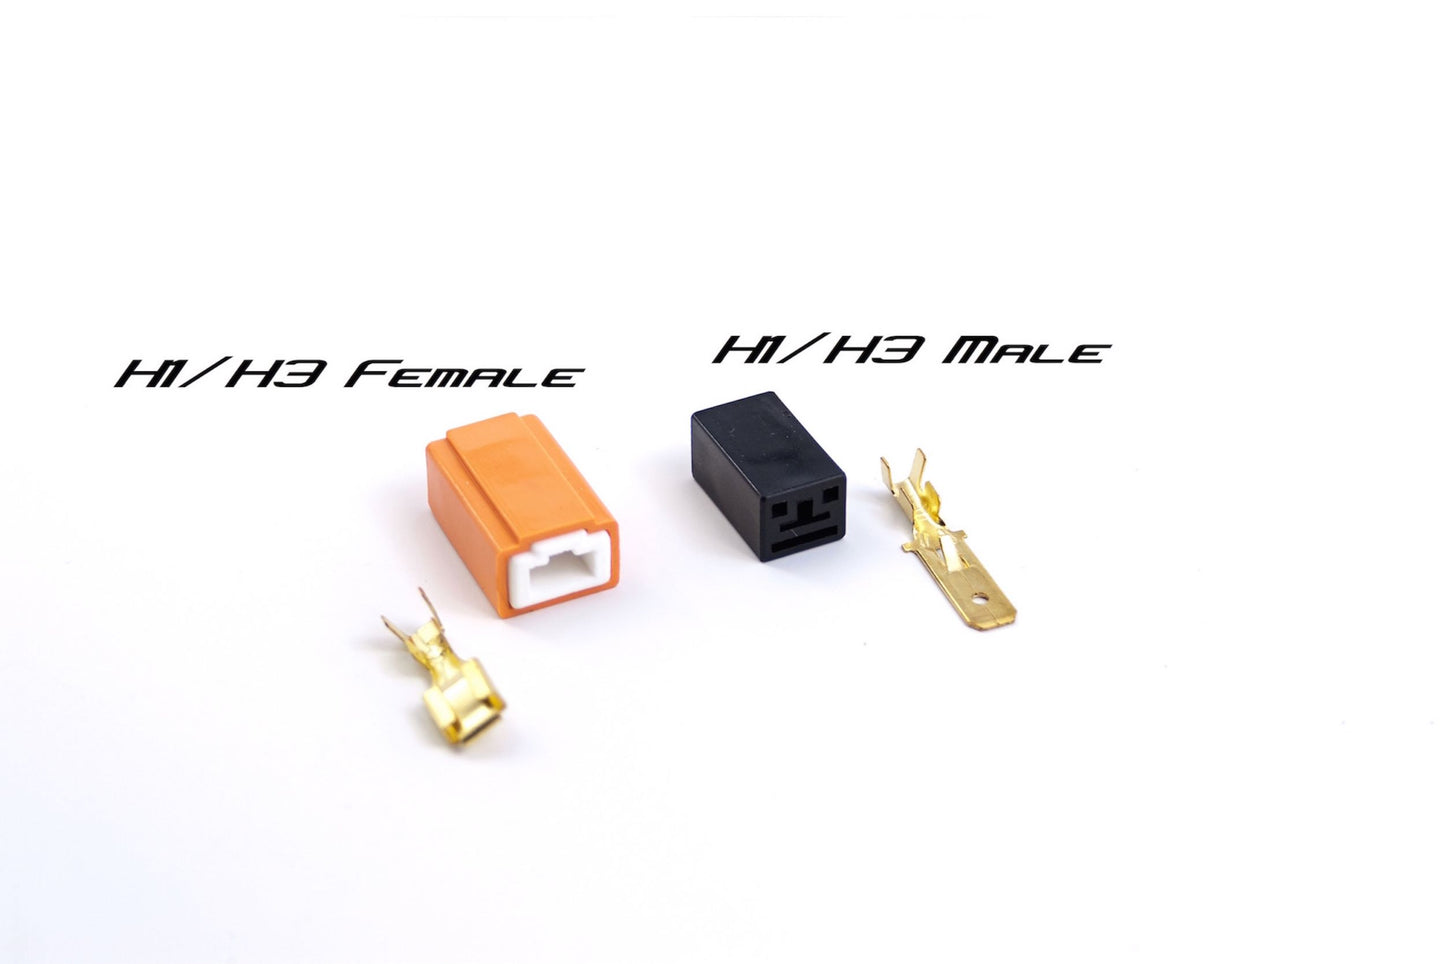 Connector: H7 Female